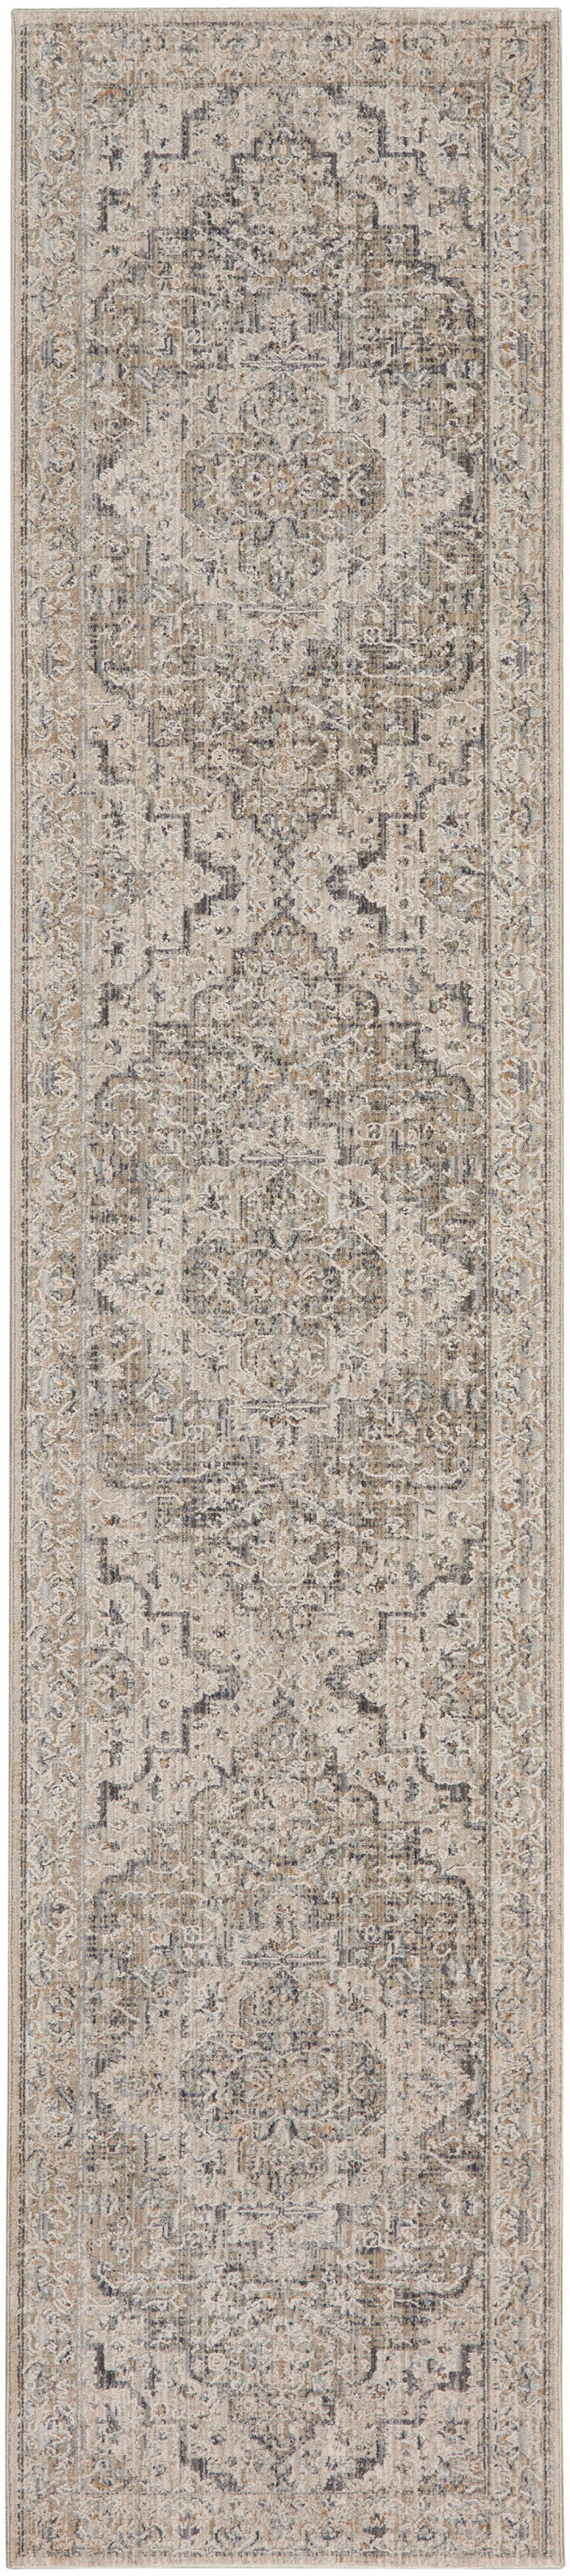 lynx ivory taupe rug by nourison 99446086327 redo 3